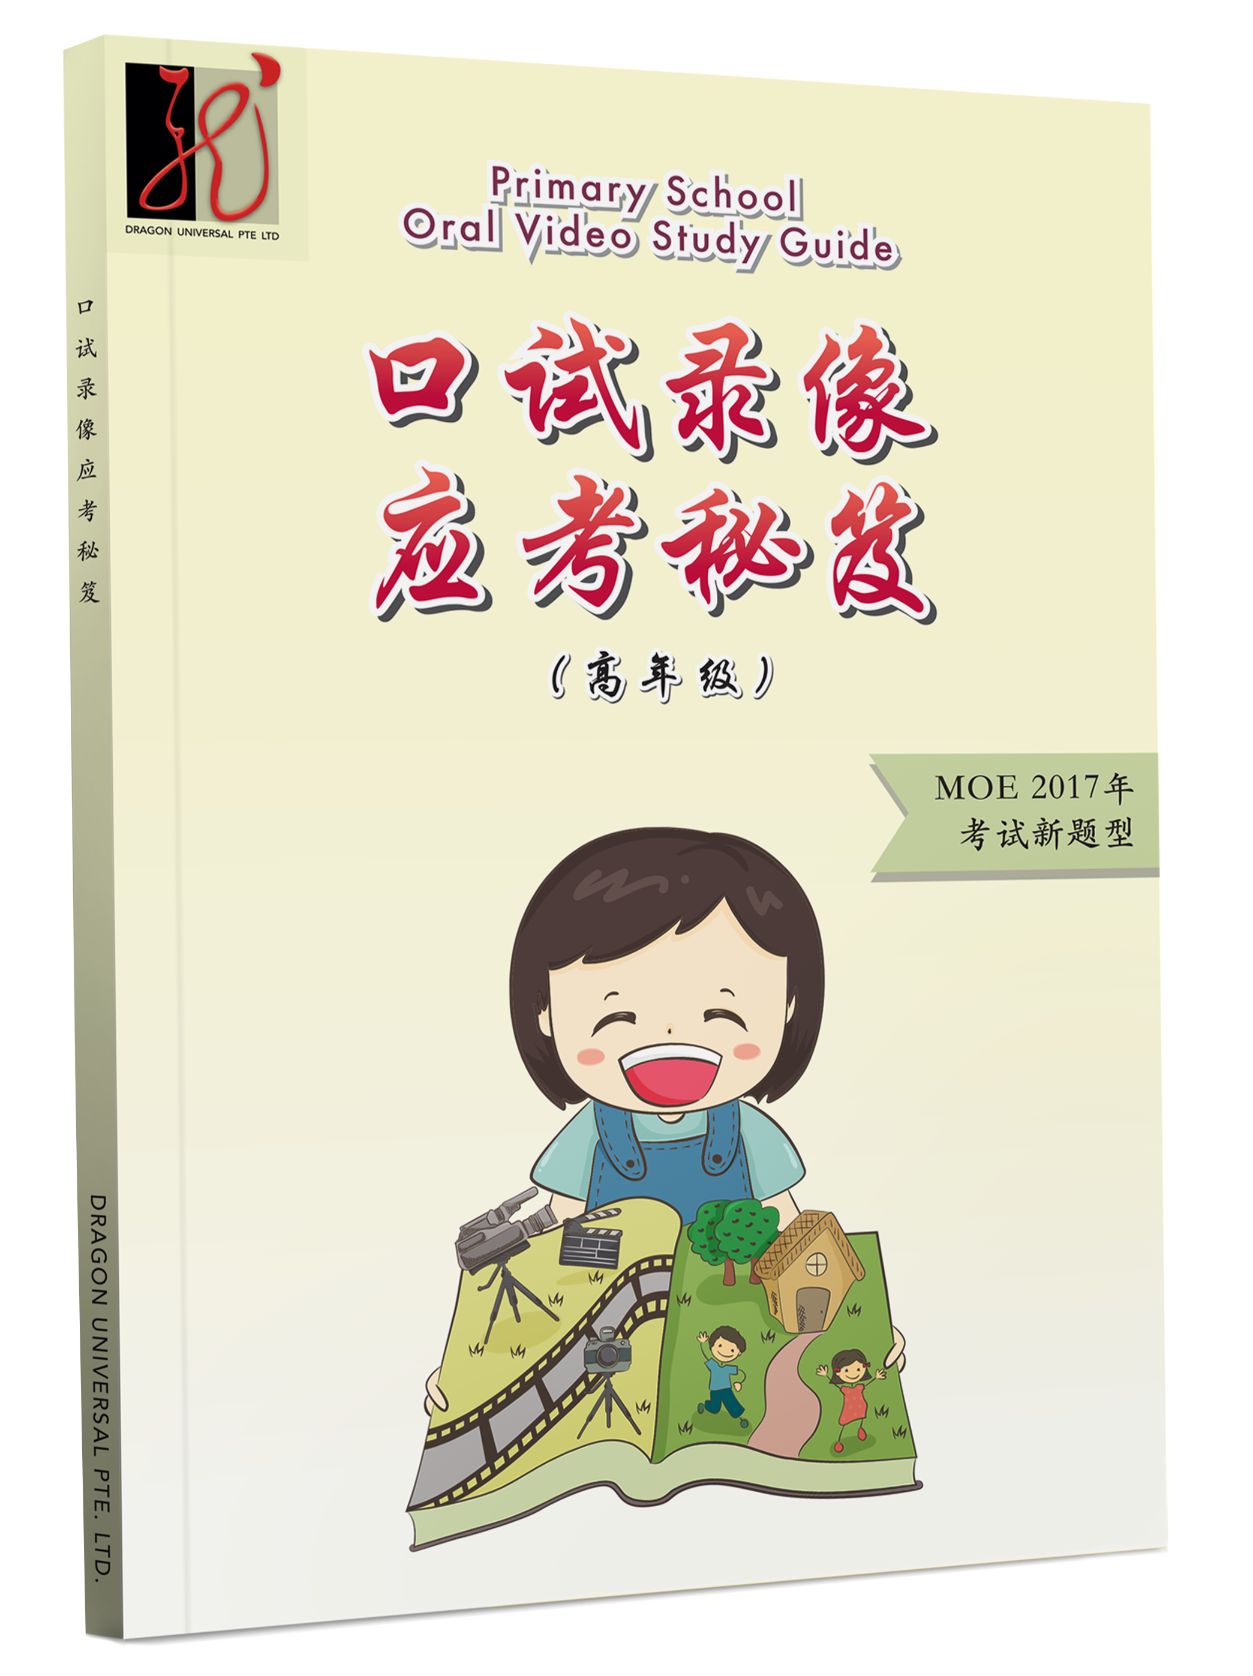 Chinese oral guide book